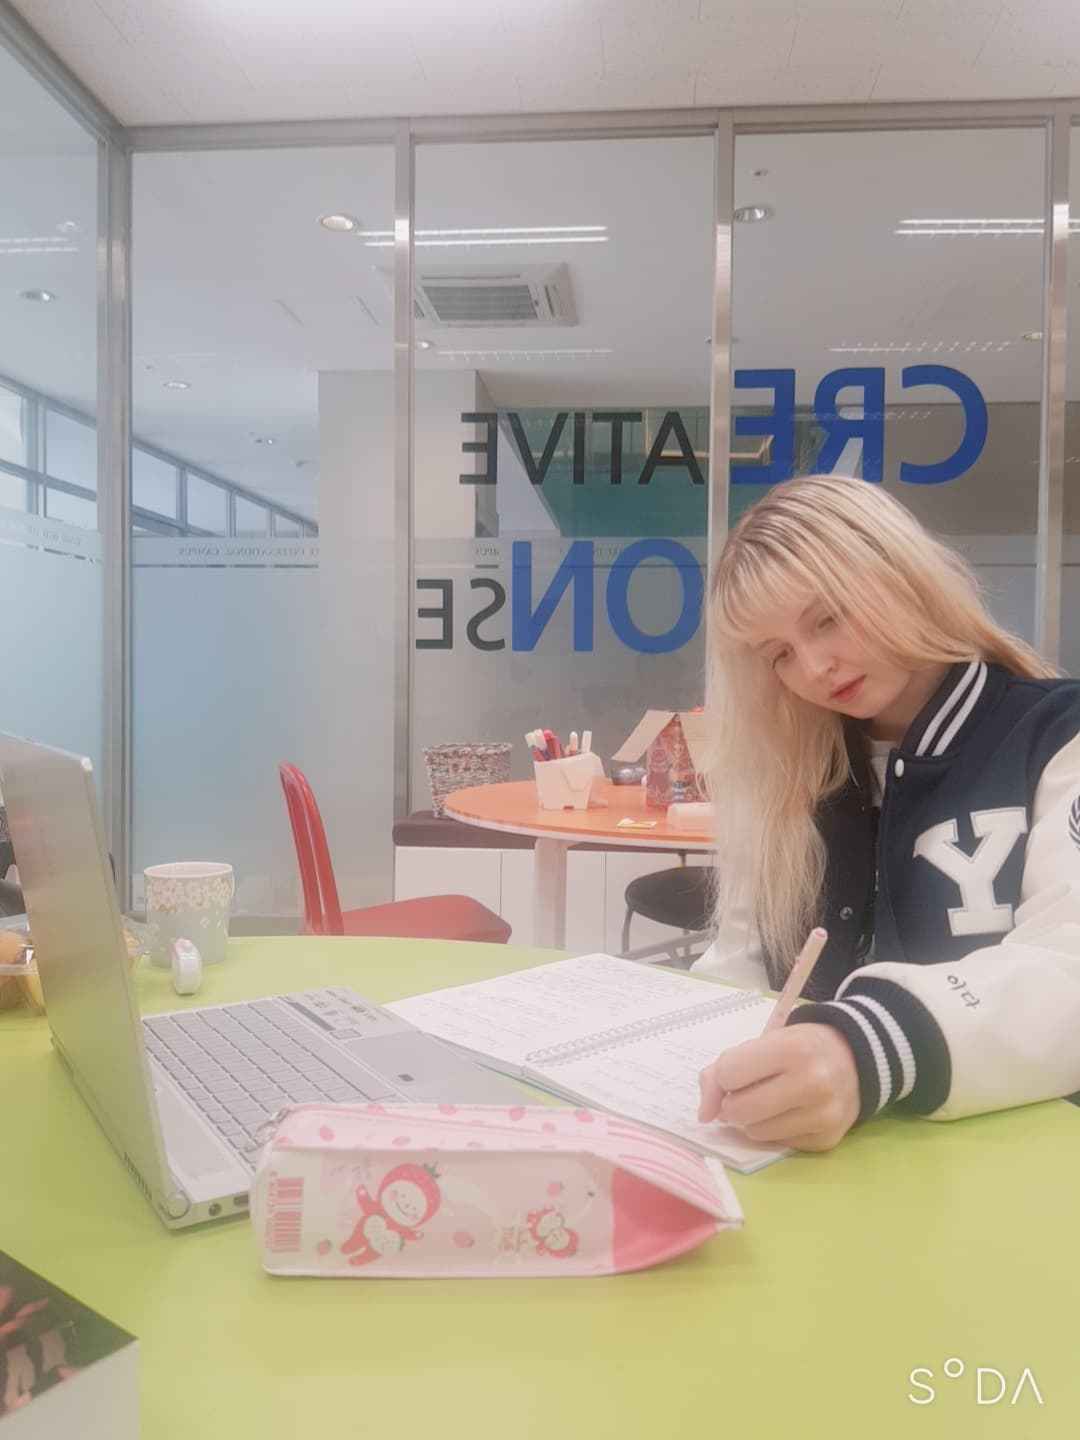 Ida Therese Hovik, a Yonsei University freshman from Norway, takes an online class from her dormitory at the international campus in Songdo, Incheon, Tuesday. (Courtesy of Ida Therese Hovik)